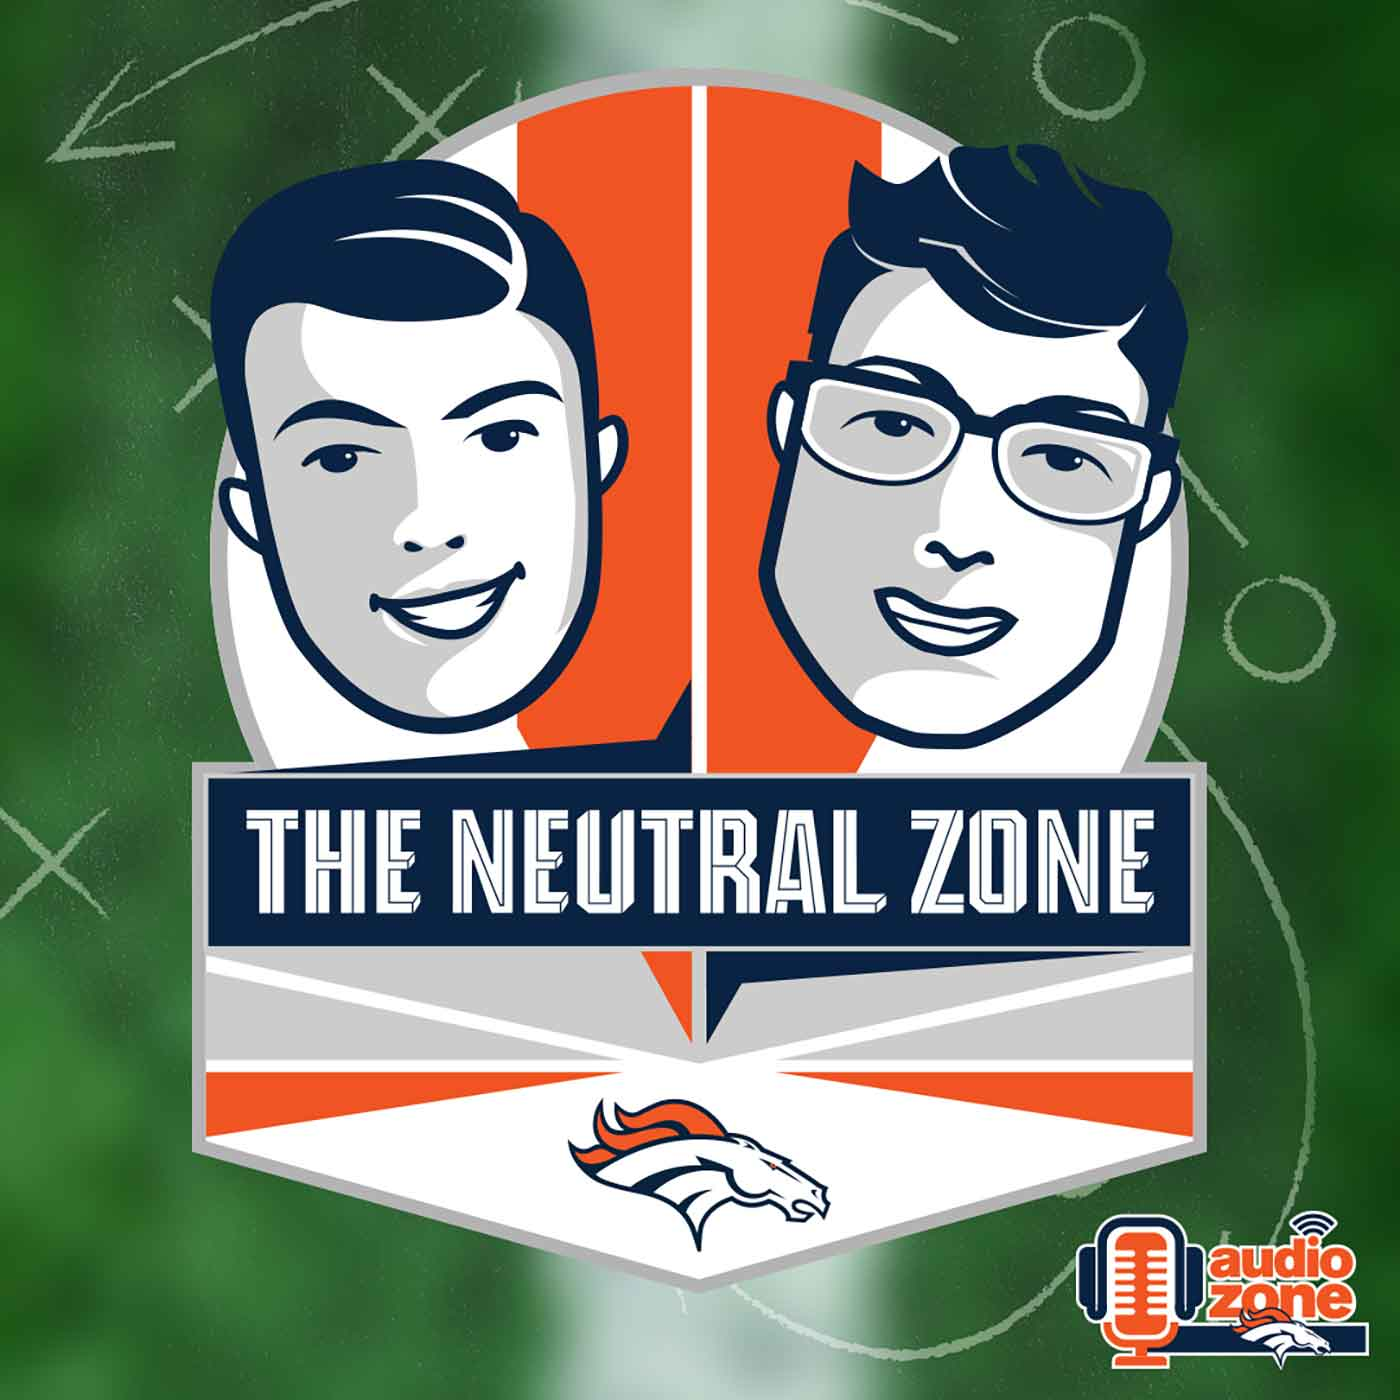 The Neutral Zone (Ep. 98): Aqib Talib reflects on his storied Broncos career